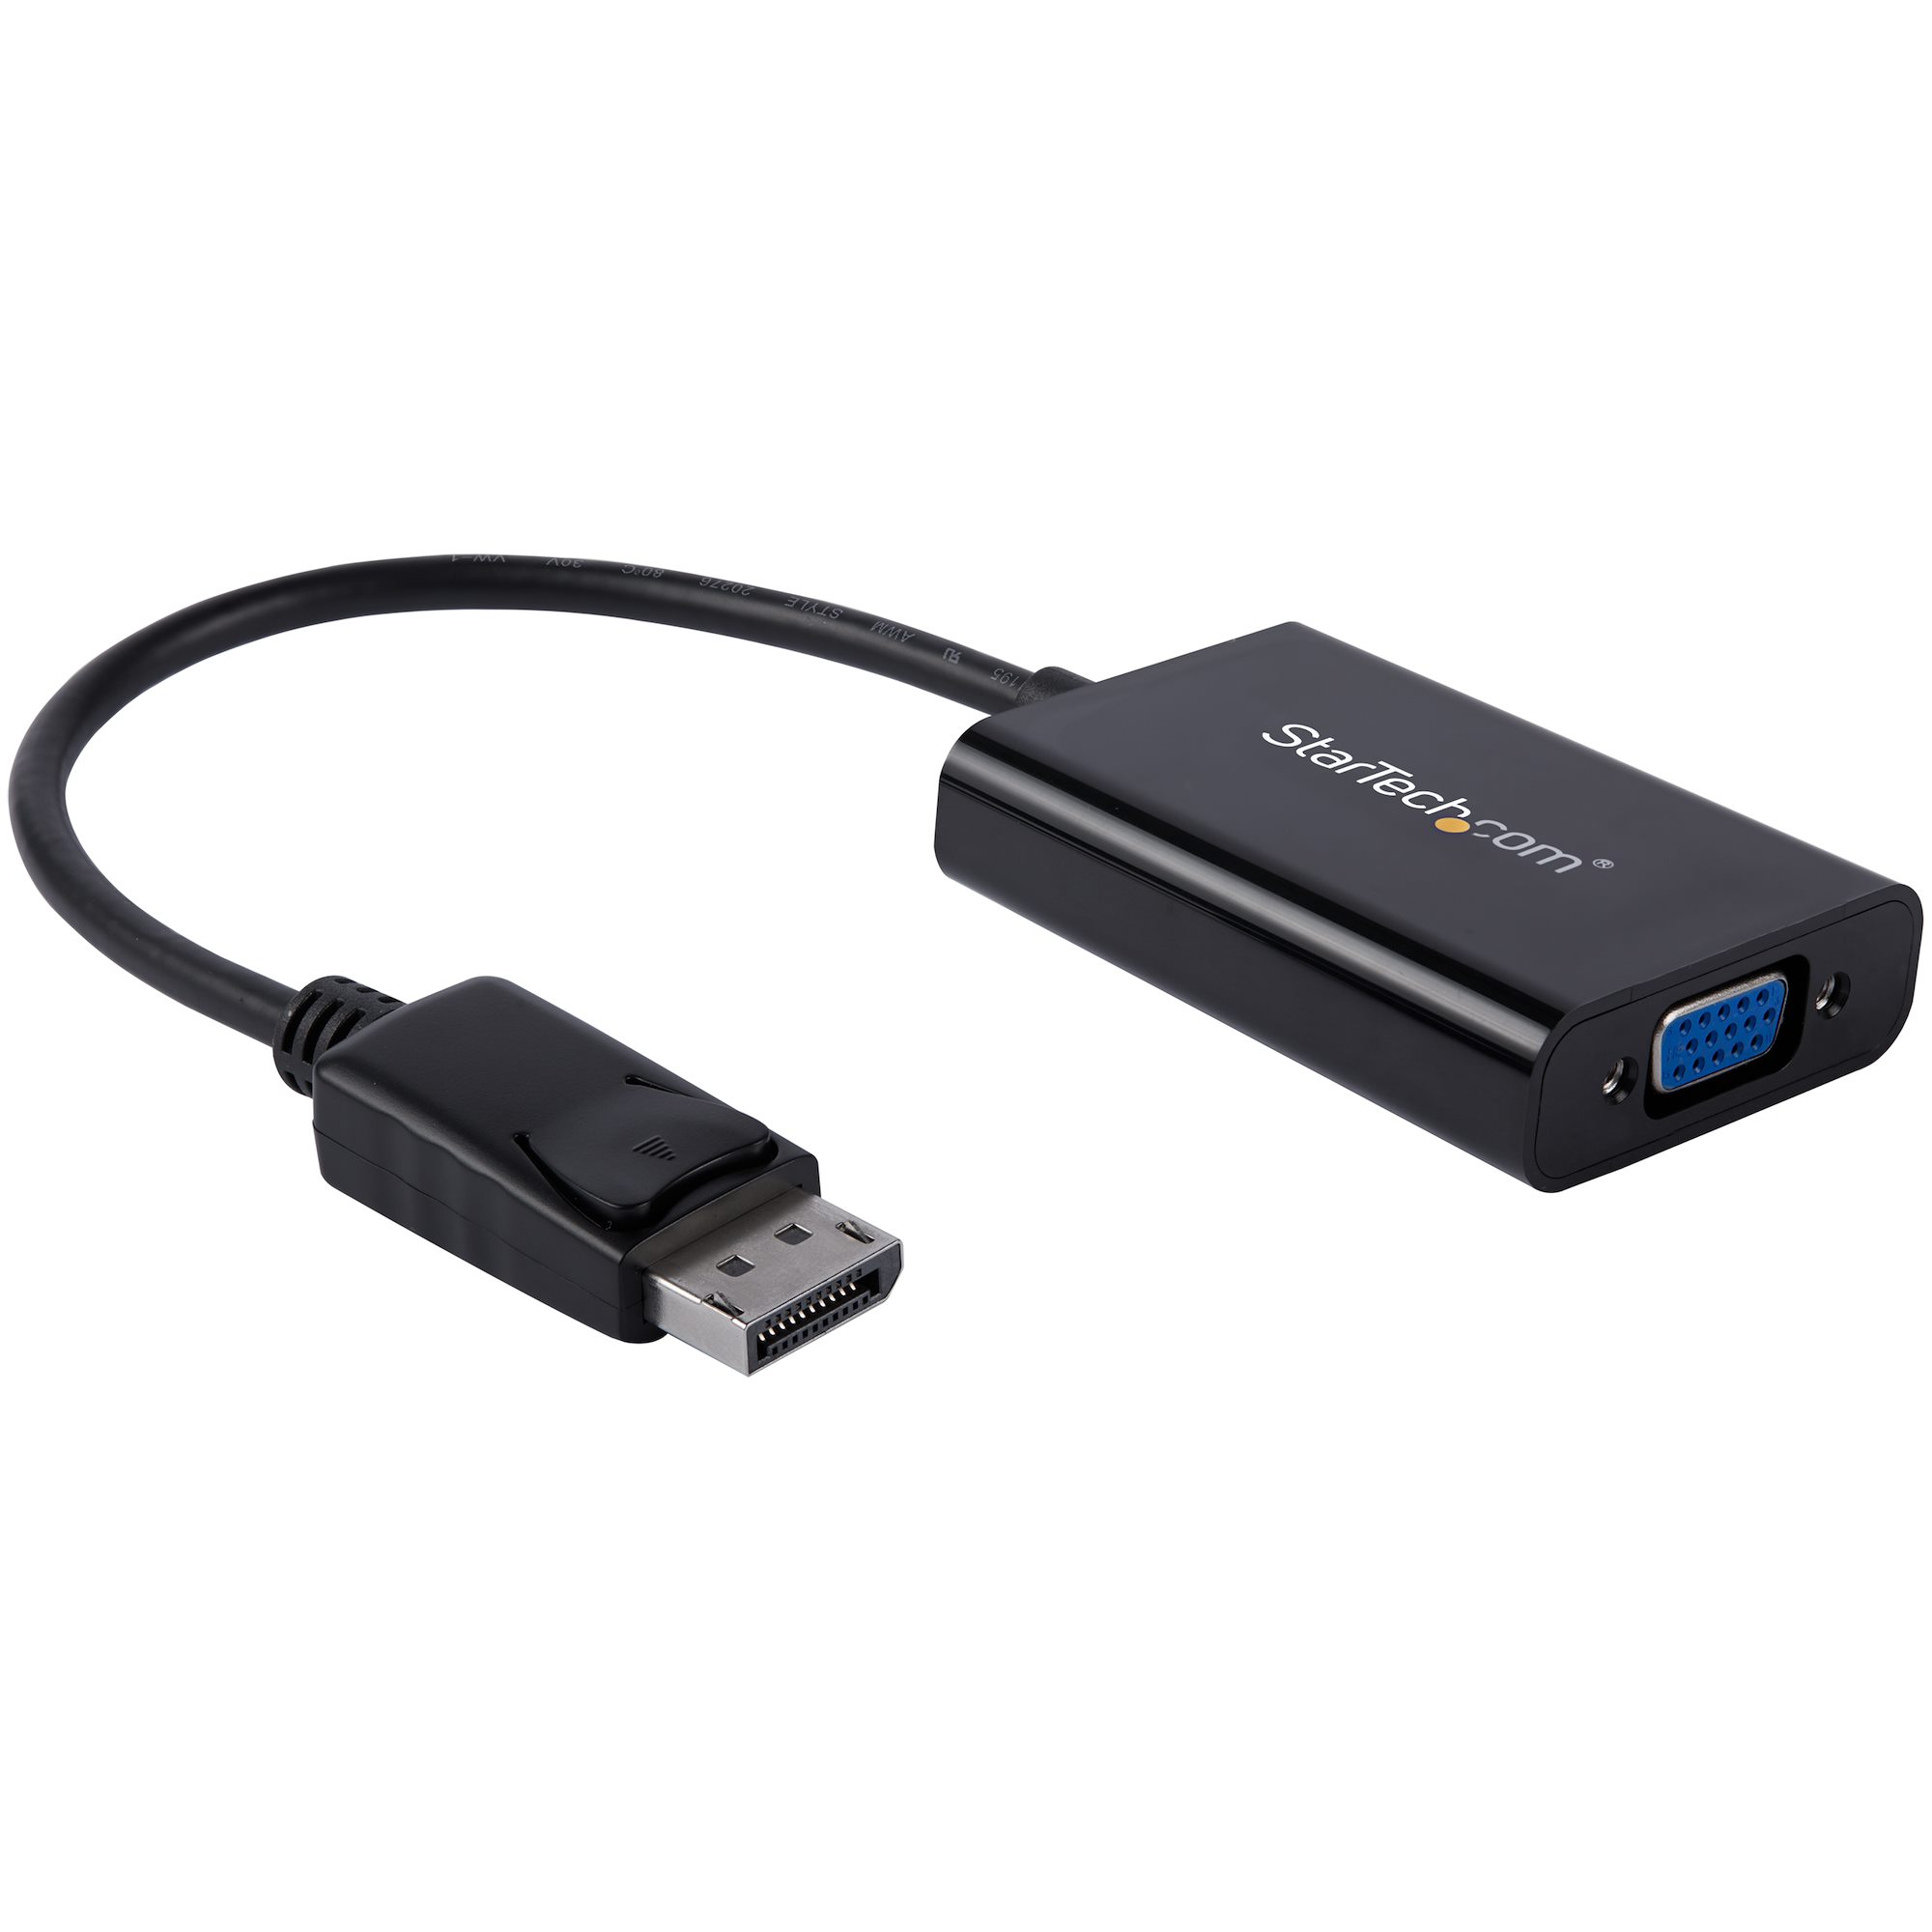 HDMI to VGA Adapter with 3.5mm for Stereo Audio plus Mini & Micro HDMI